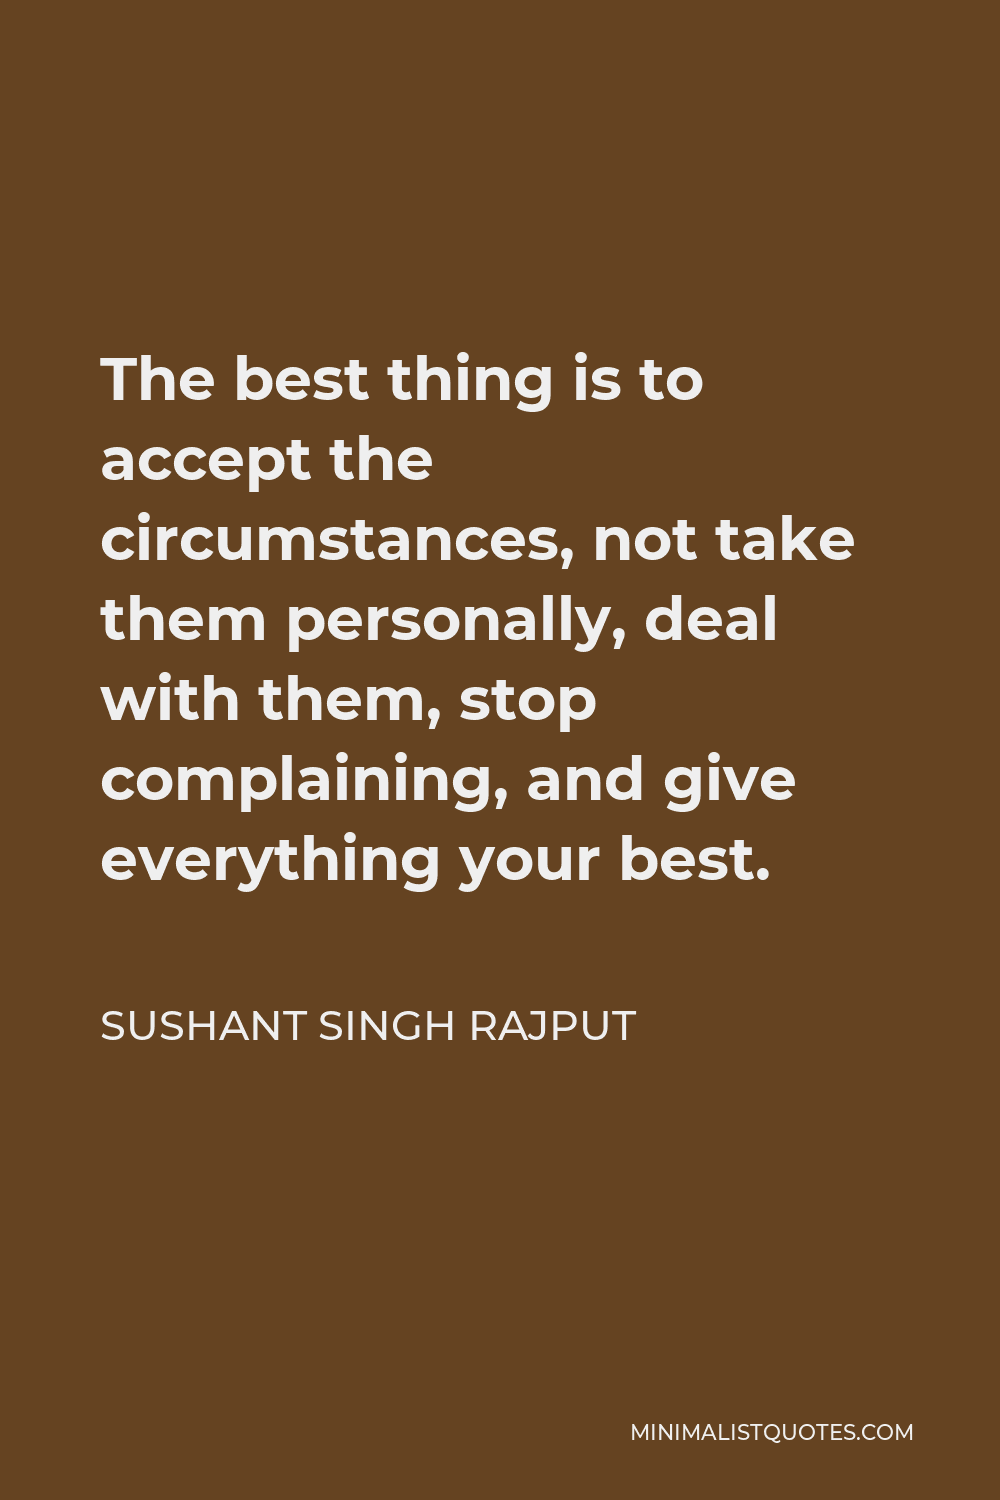 Sushant Singh Rajput Quote - The best thing is to accept the circumstances, not take them personally, deal with them, stop complaining, and give everything your best.